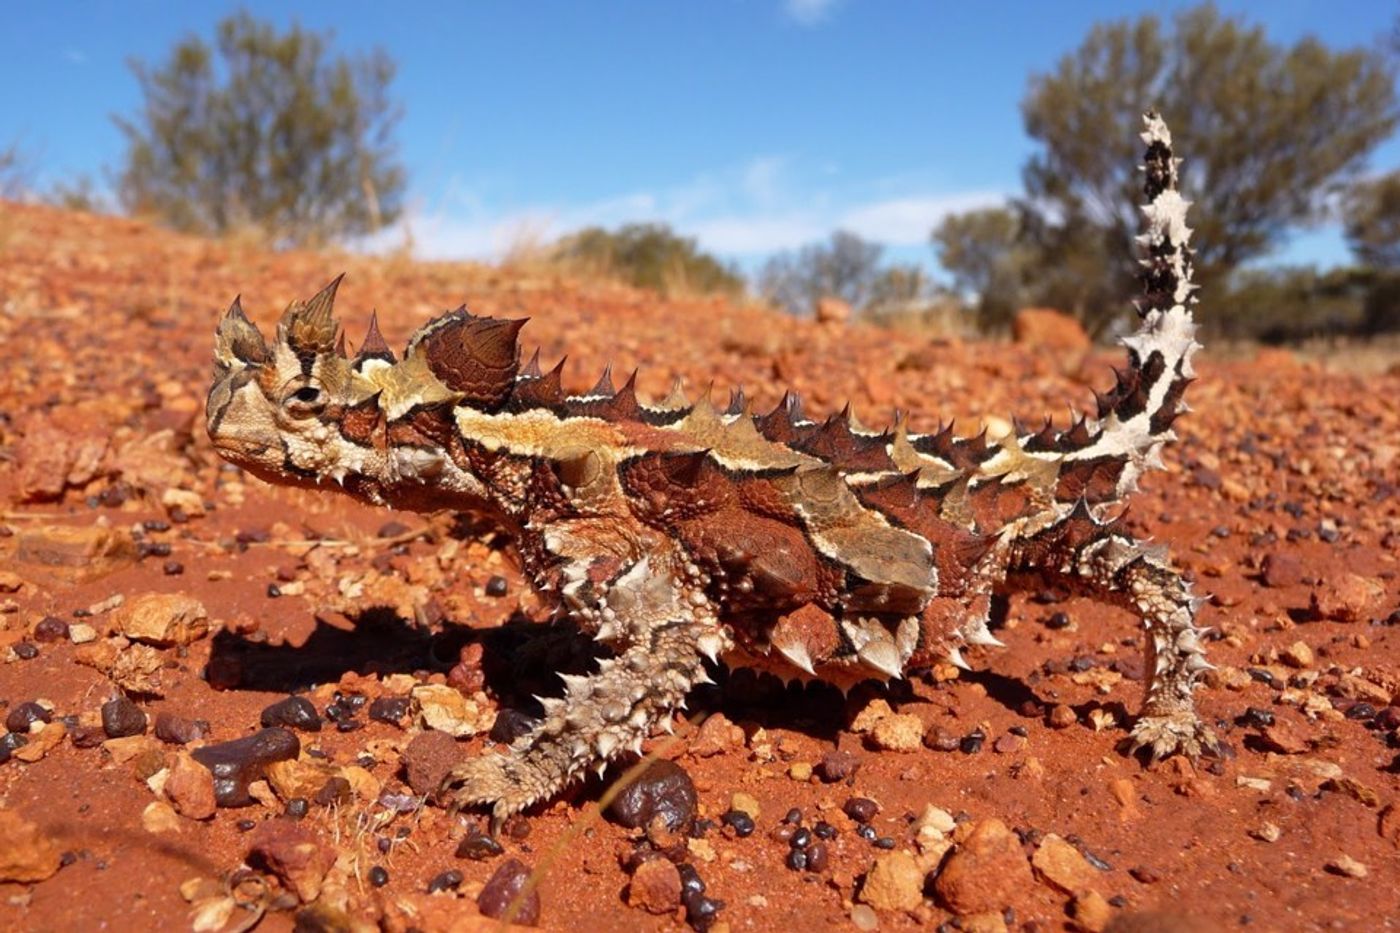 The thorny devil can drink water without using its mouth, kind of.